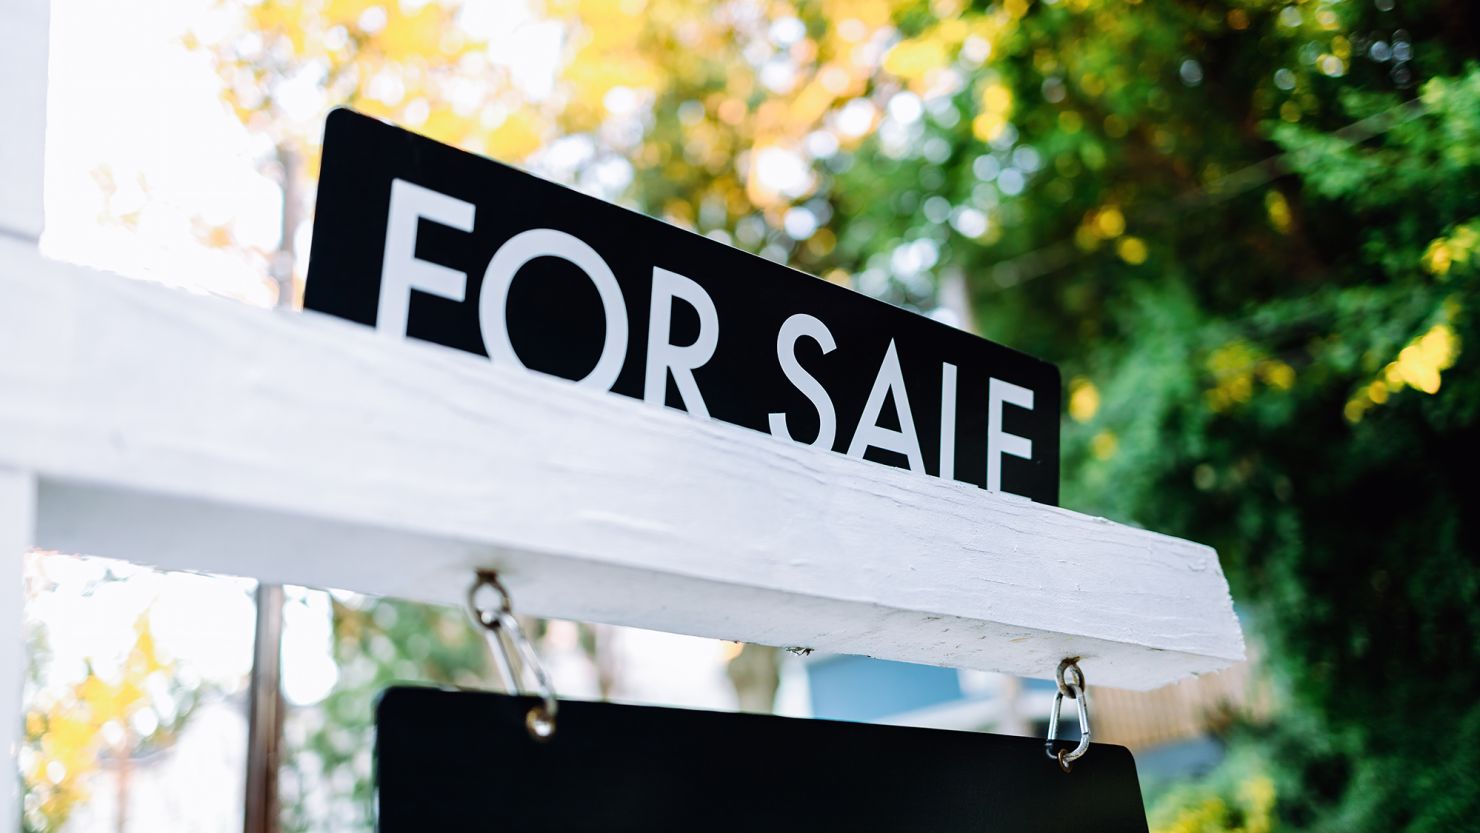 The National Association of Realtors, and some residential brokerages have been found liable for nearly $1.8 billion for conspiring to keep commissions artificially high.